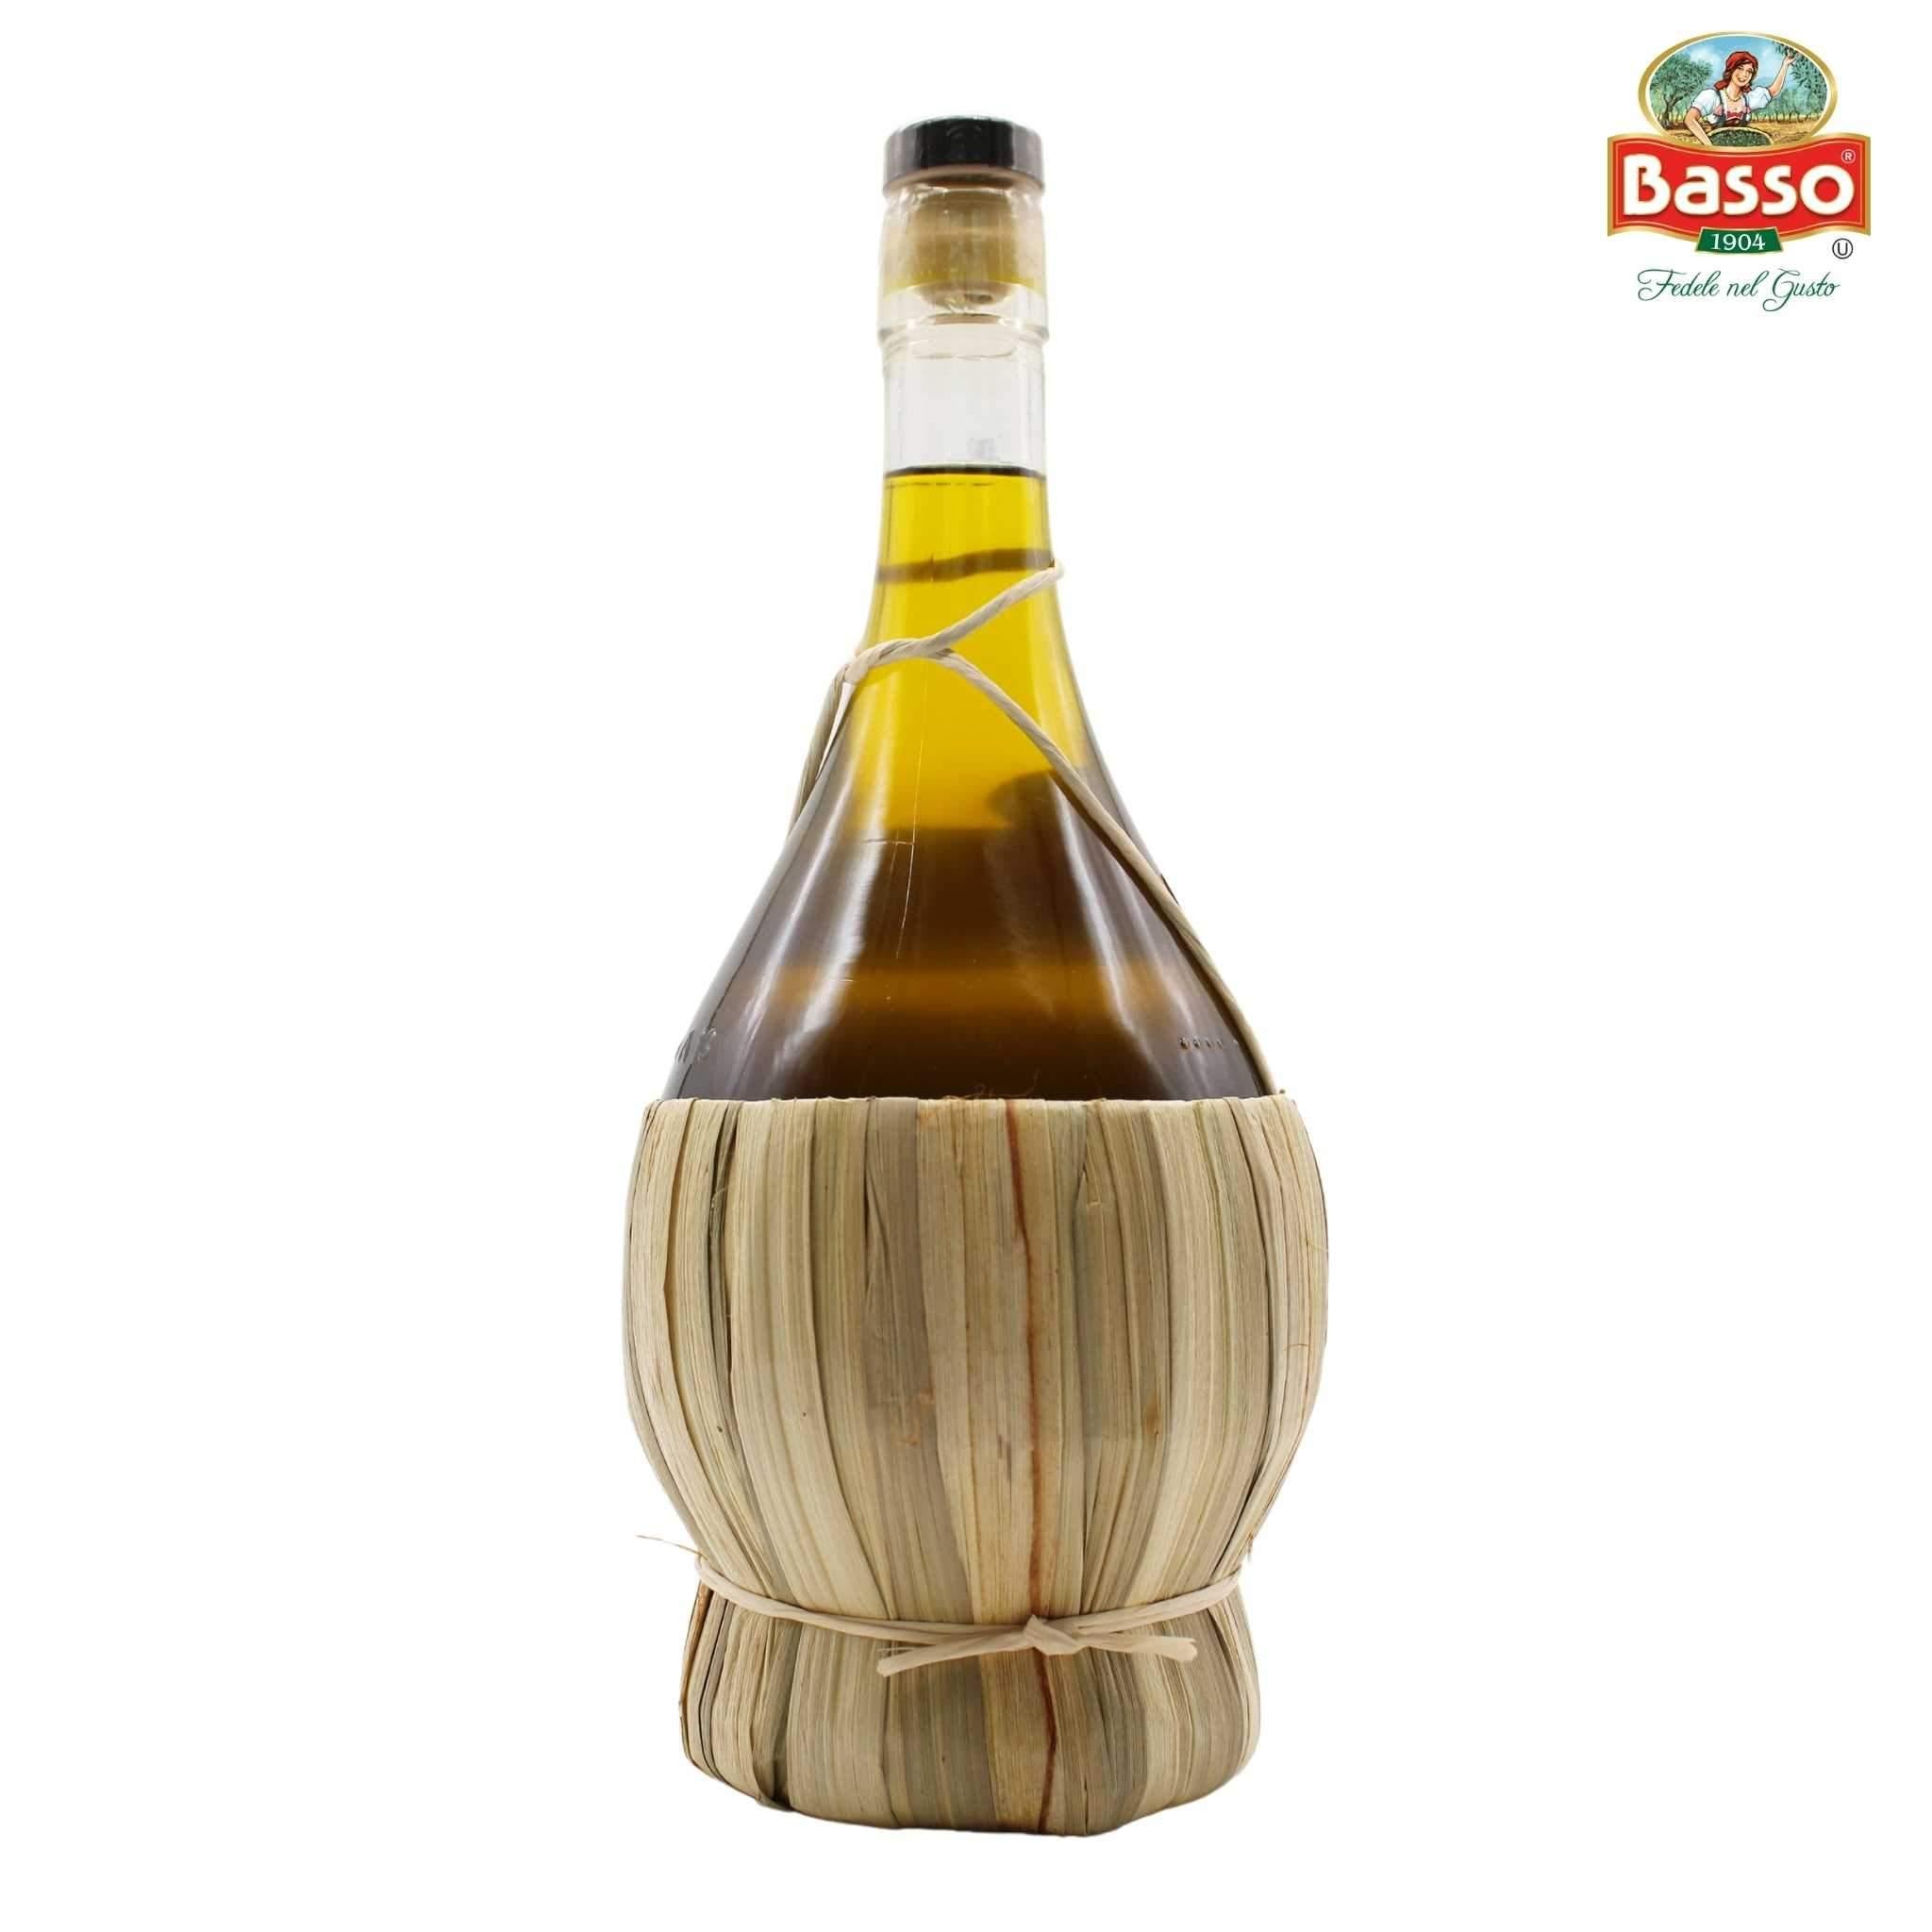 Basso Unfiltered "Premium" First Cold Pressed" Extra Virgin Olive Oil (Wicker / Straw Basket)